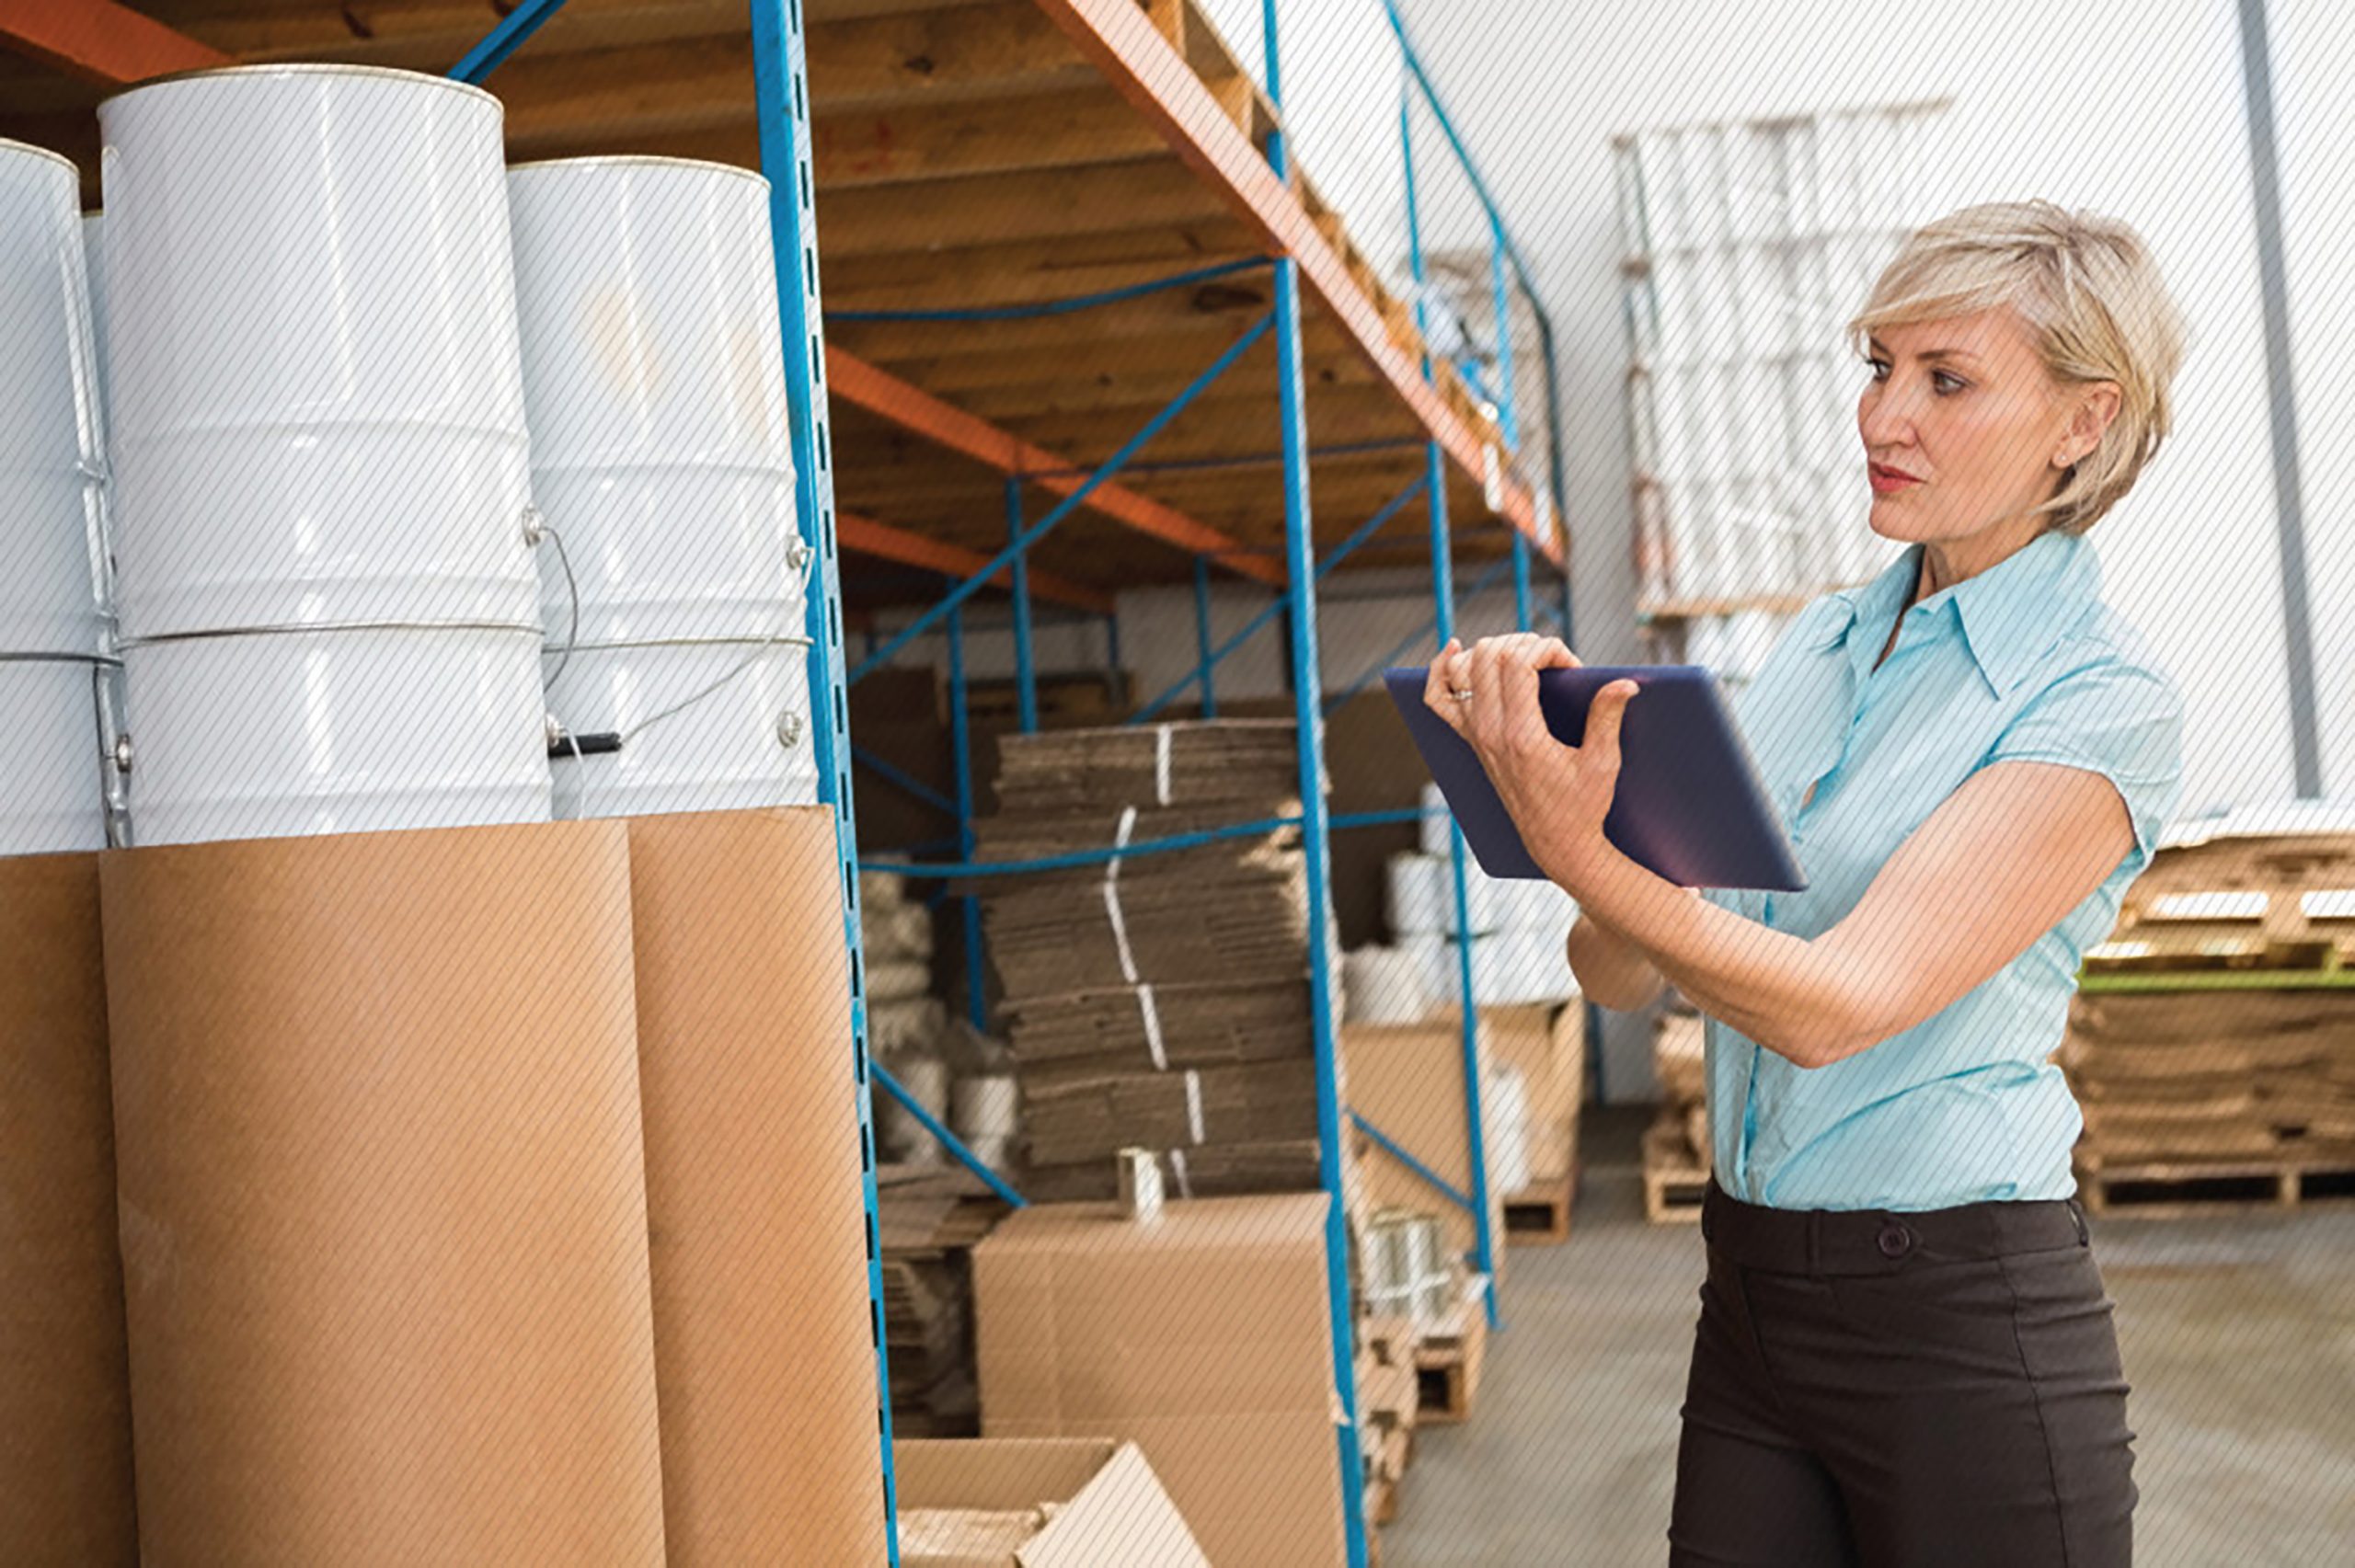 Featured image: Warehouse employee taking inventory - Read full post: Anchor Your Digital Transformation Strategy To Customer Experience